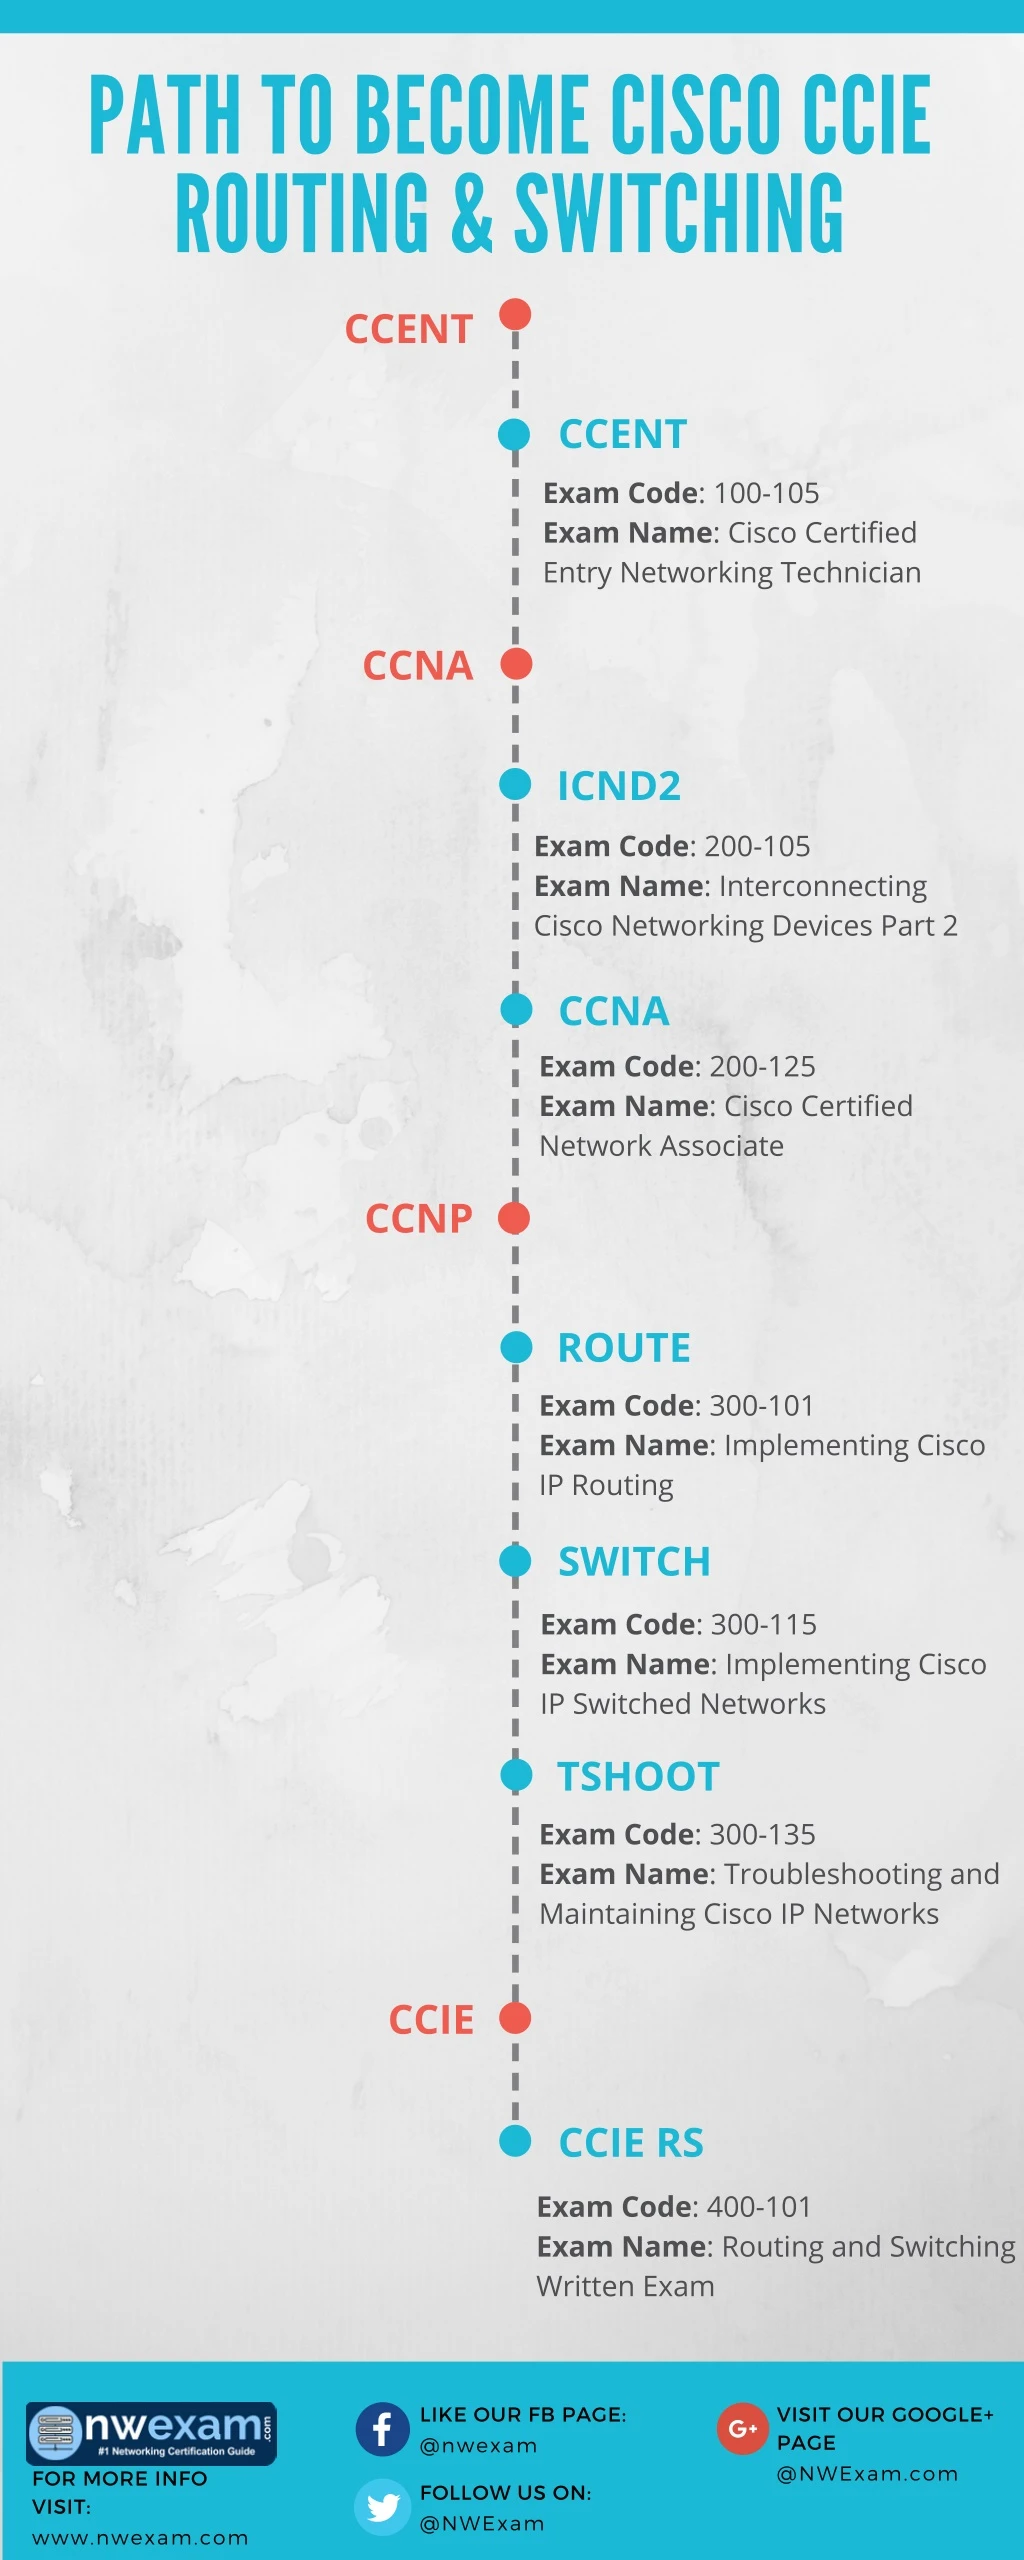 p a th to become cisco ccie routing switching